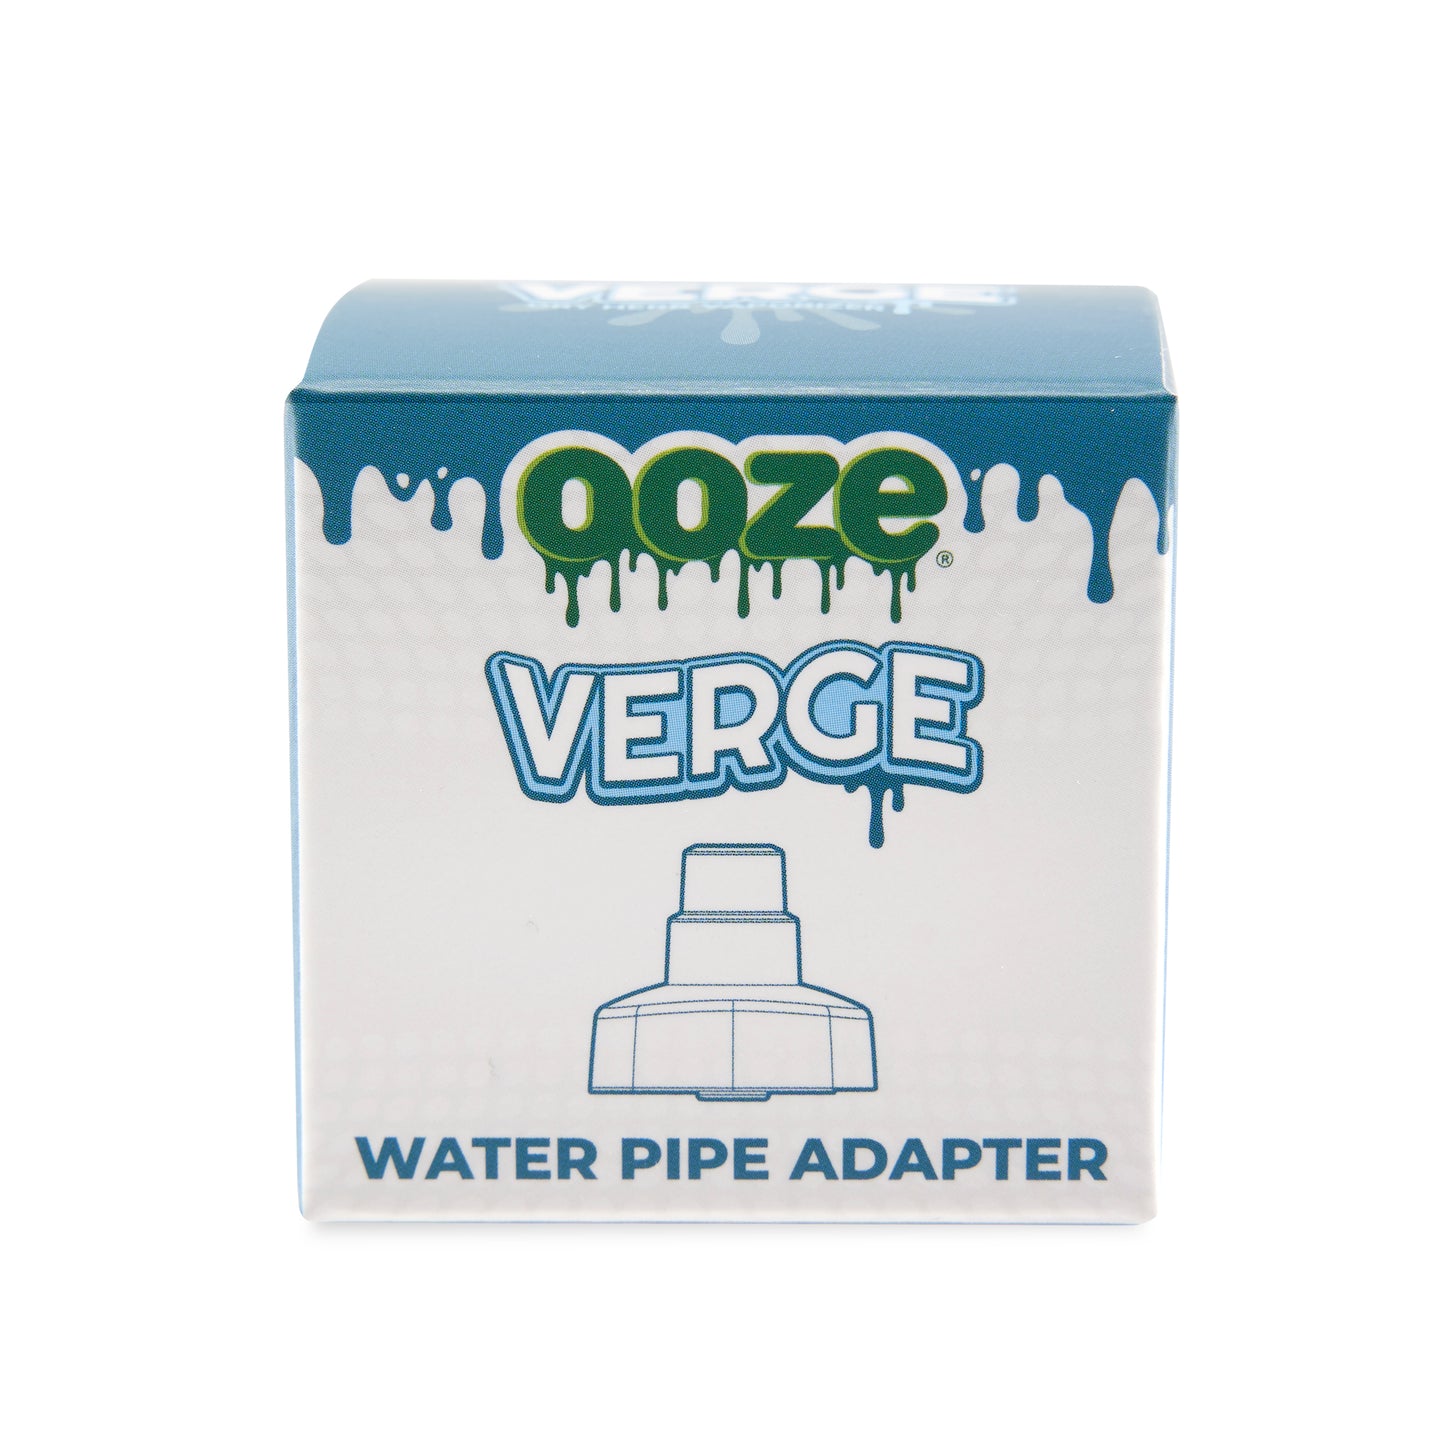 The front of the box for the the Ooze Verge water pipe adapter.